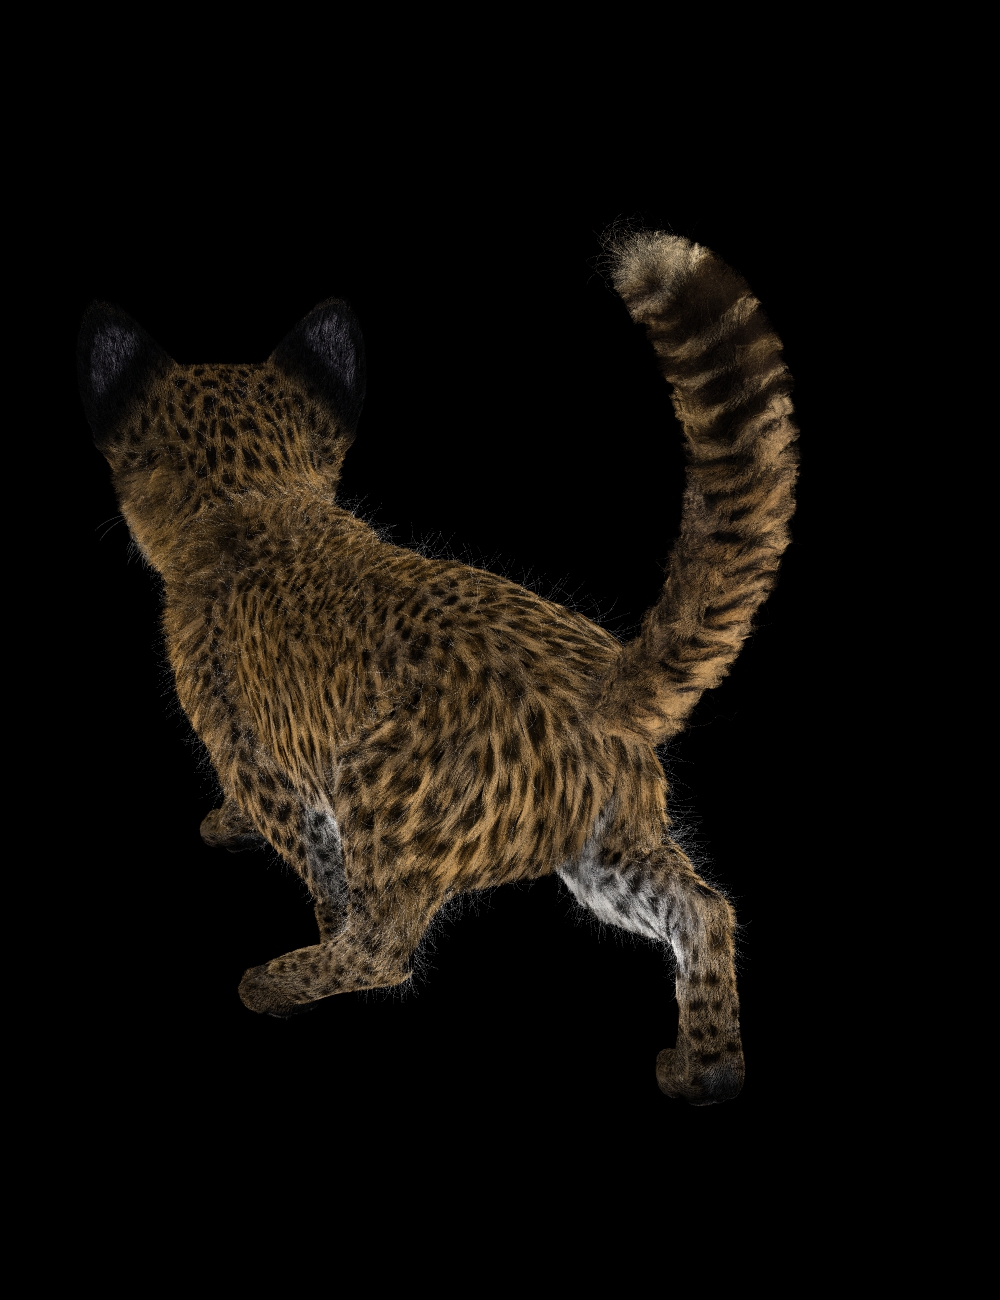 Leopard Kitty with Big ears back view 3Delight.jpg